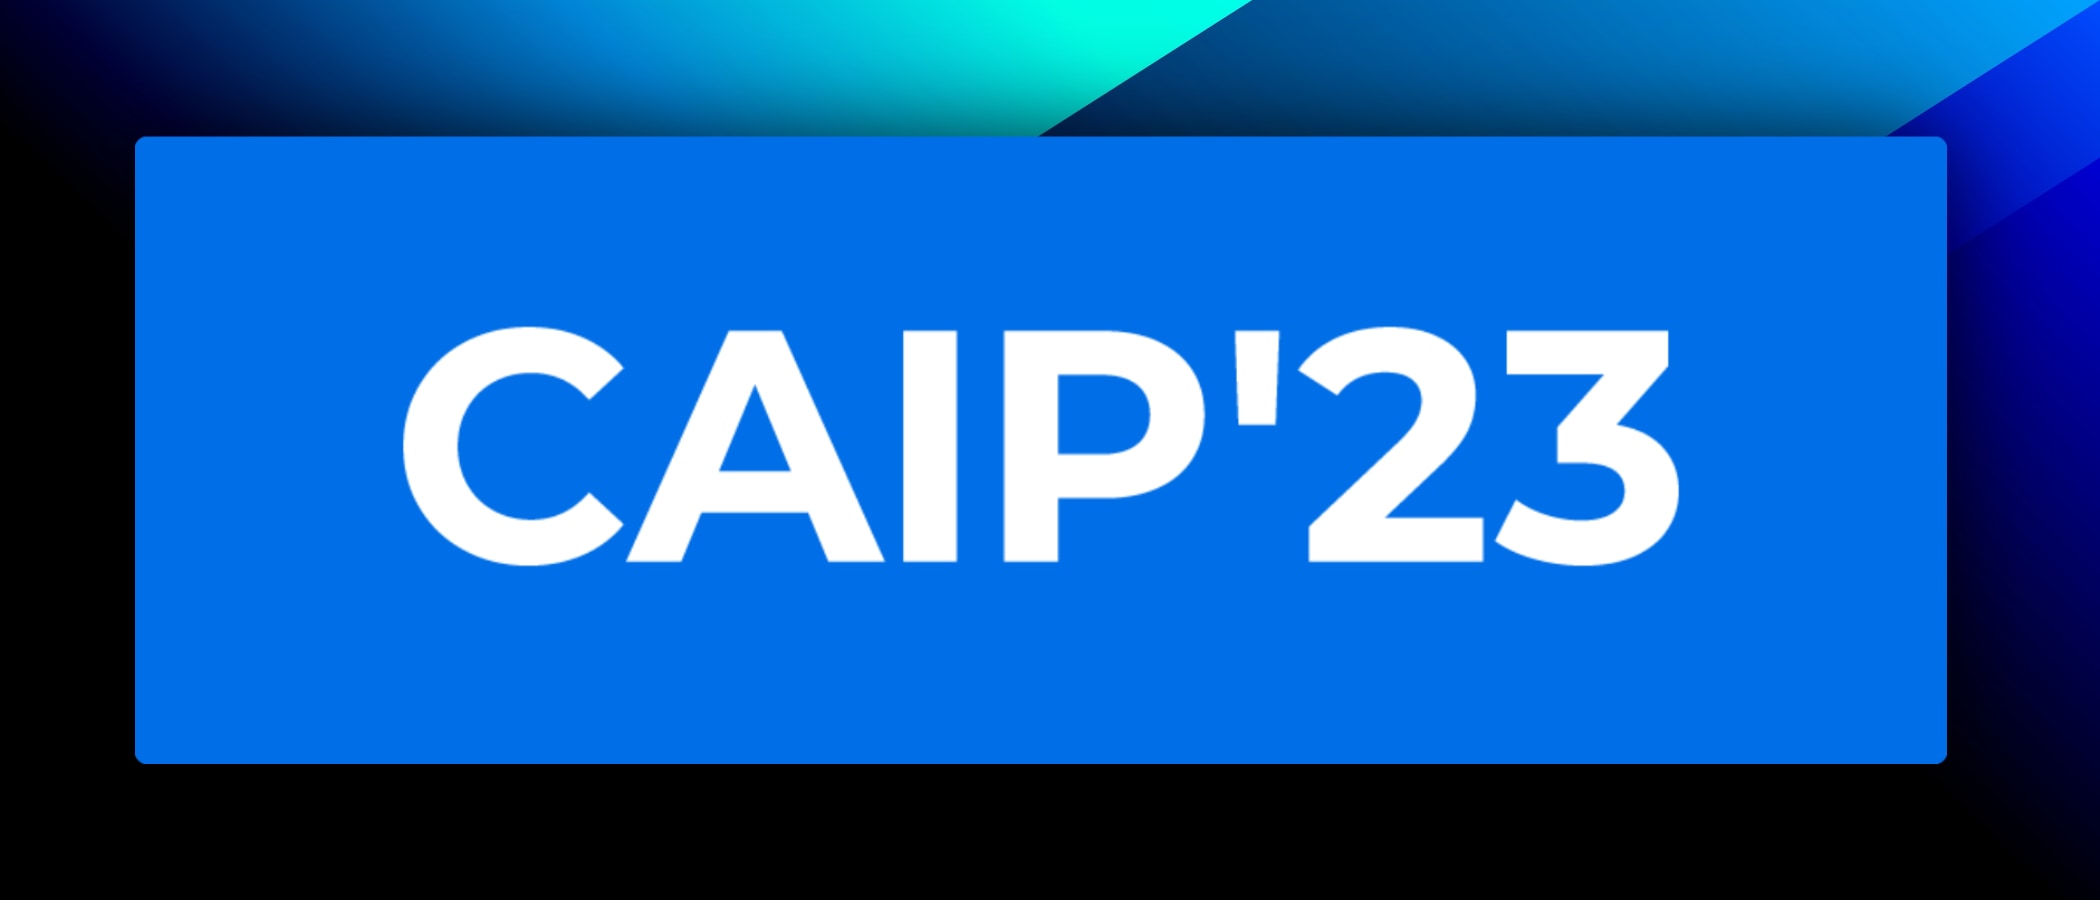 caip'23 Logo on abstract background